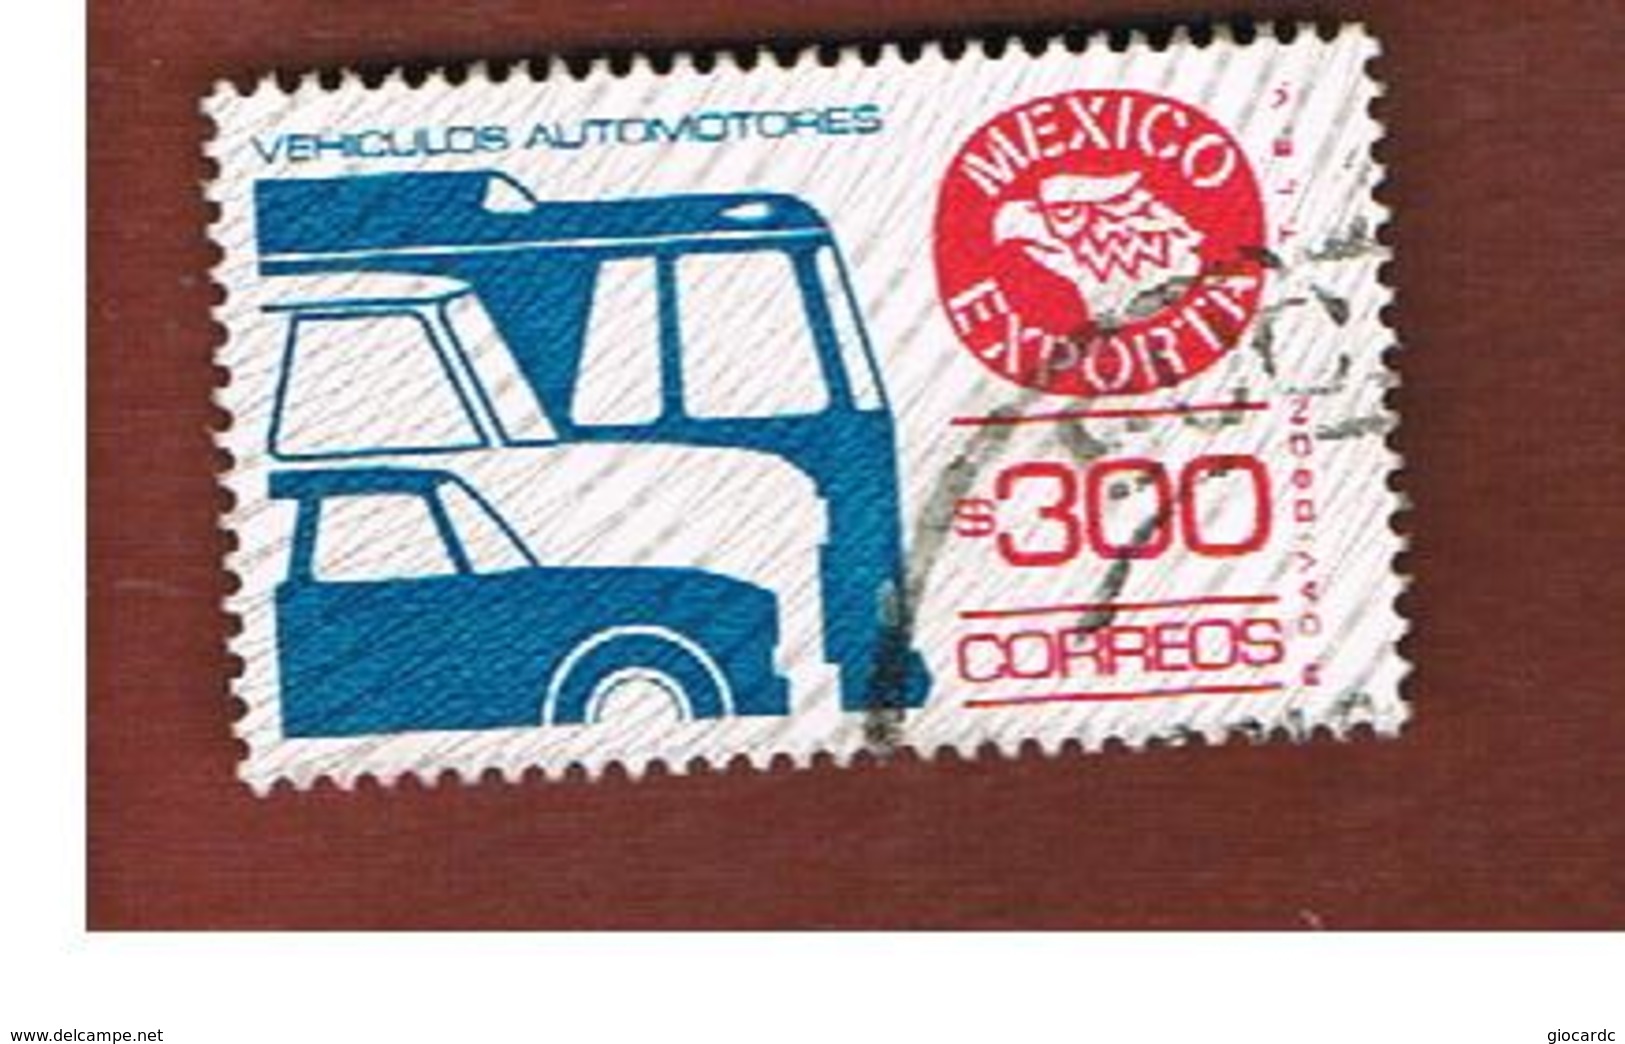 MESSICO (MEXICO) -  SG 1360g   - 1983    MEXICAN EXPORTS:   MOTOR VEHICLES          -  USED° - Messico